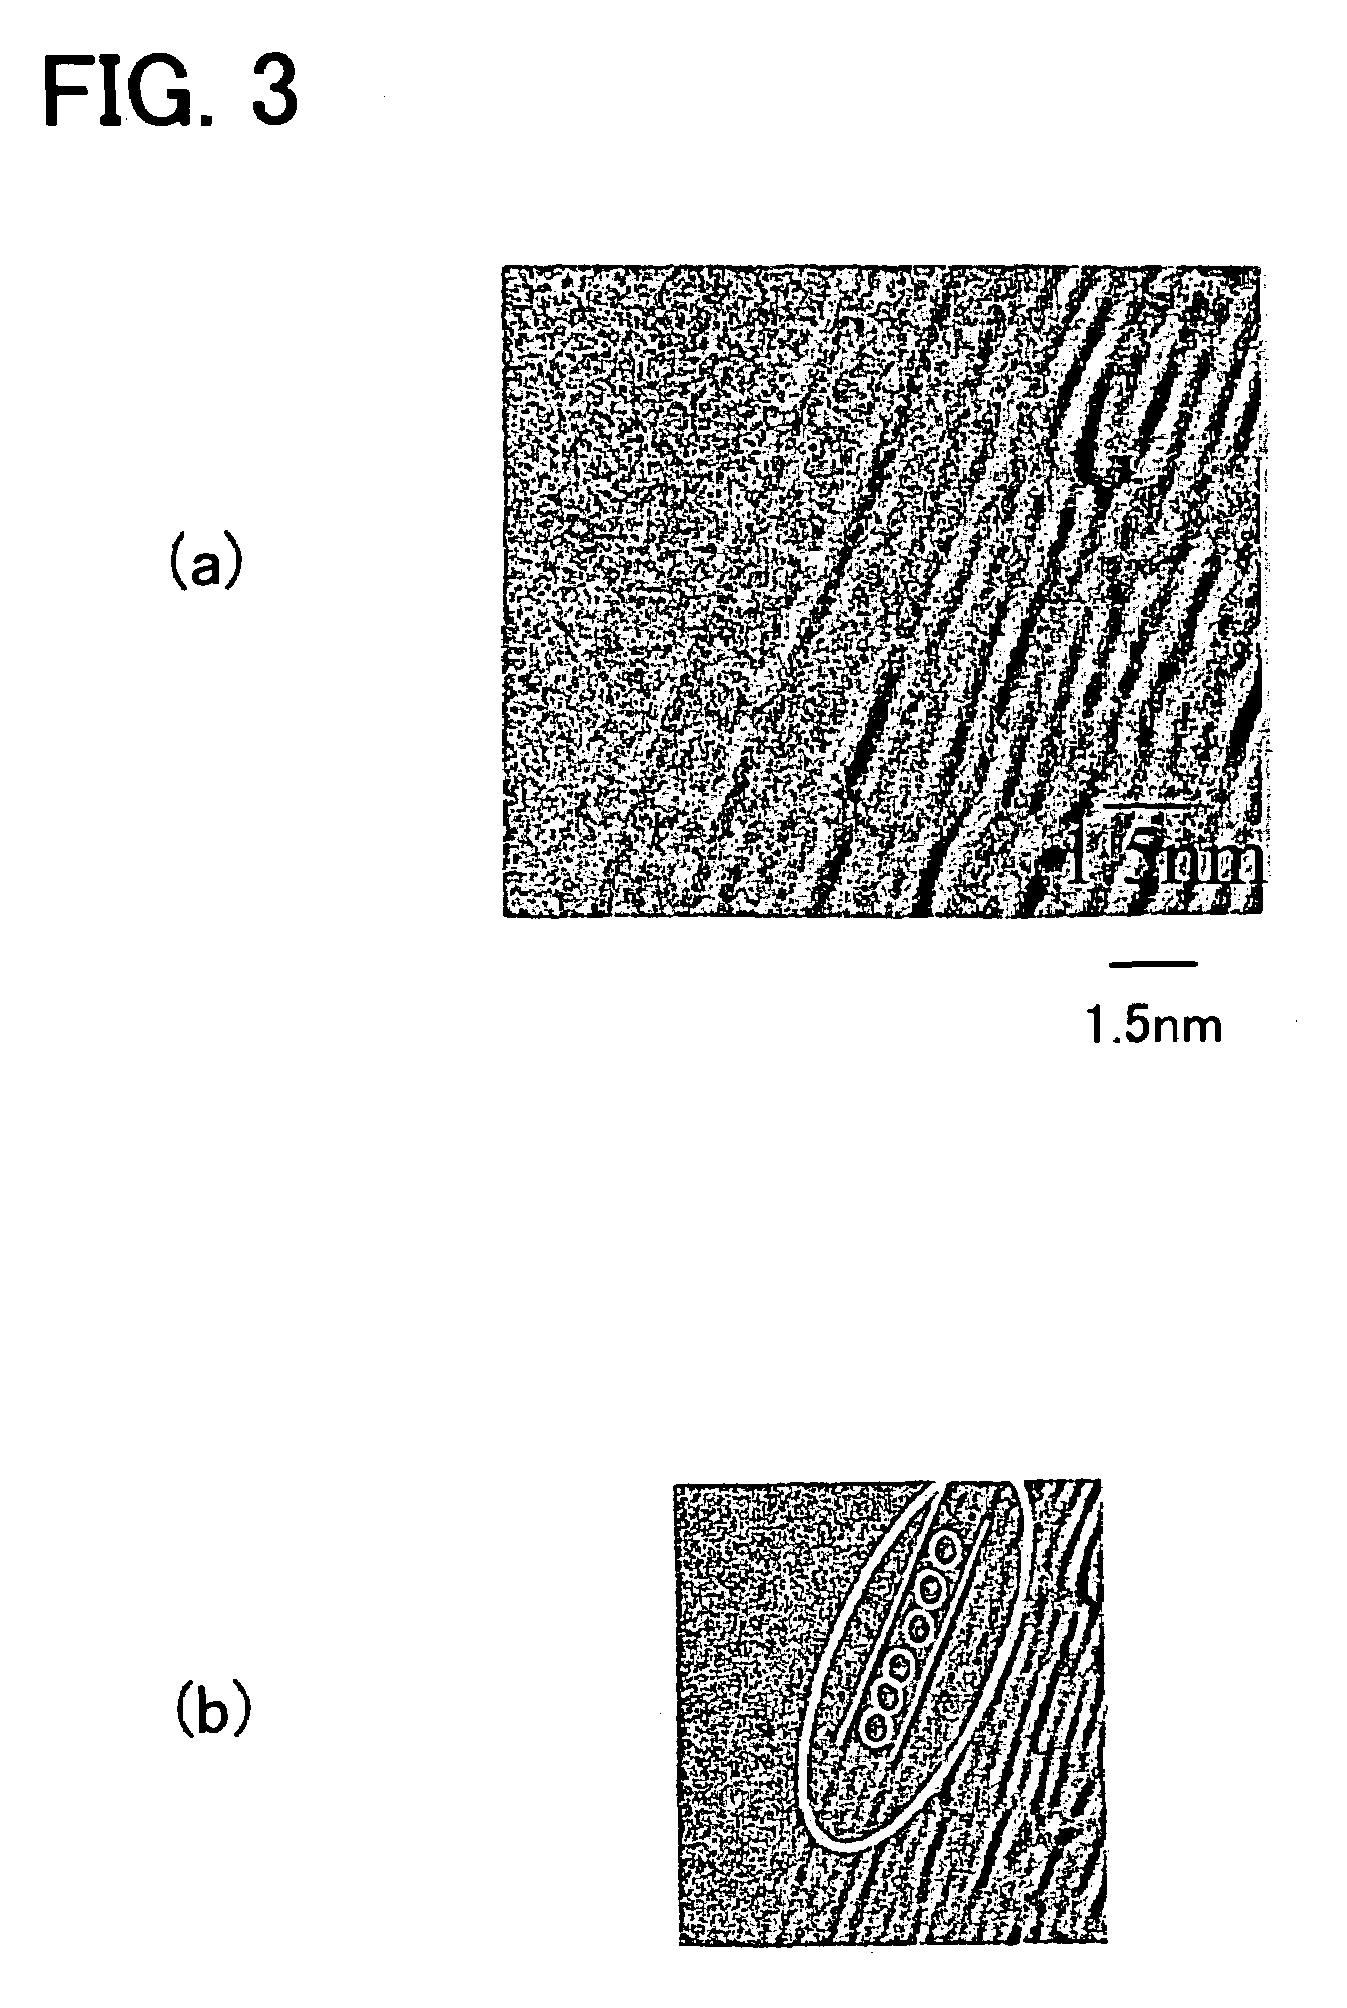 Methods for manufacturing multi-wall carbon nanotubes